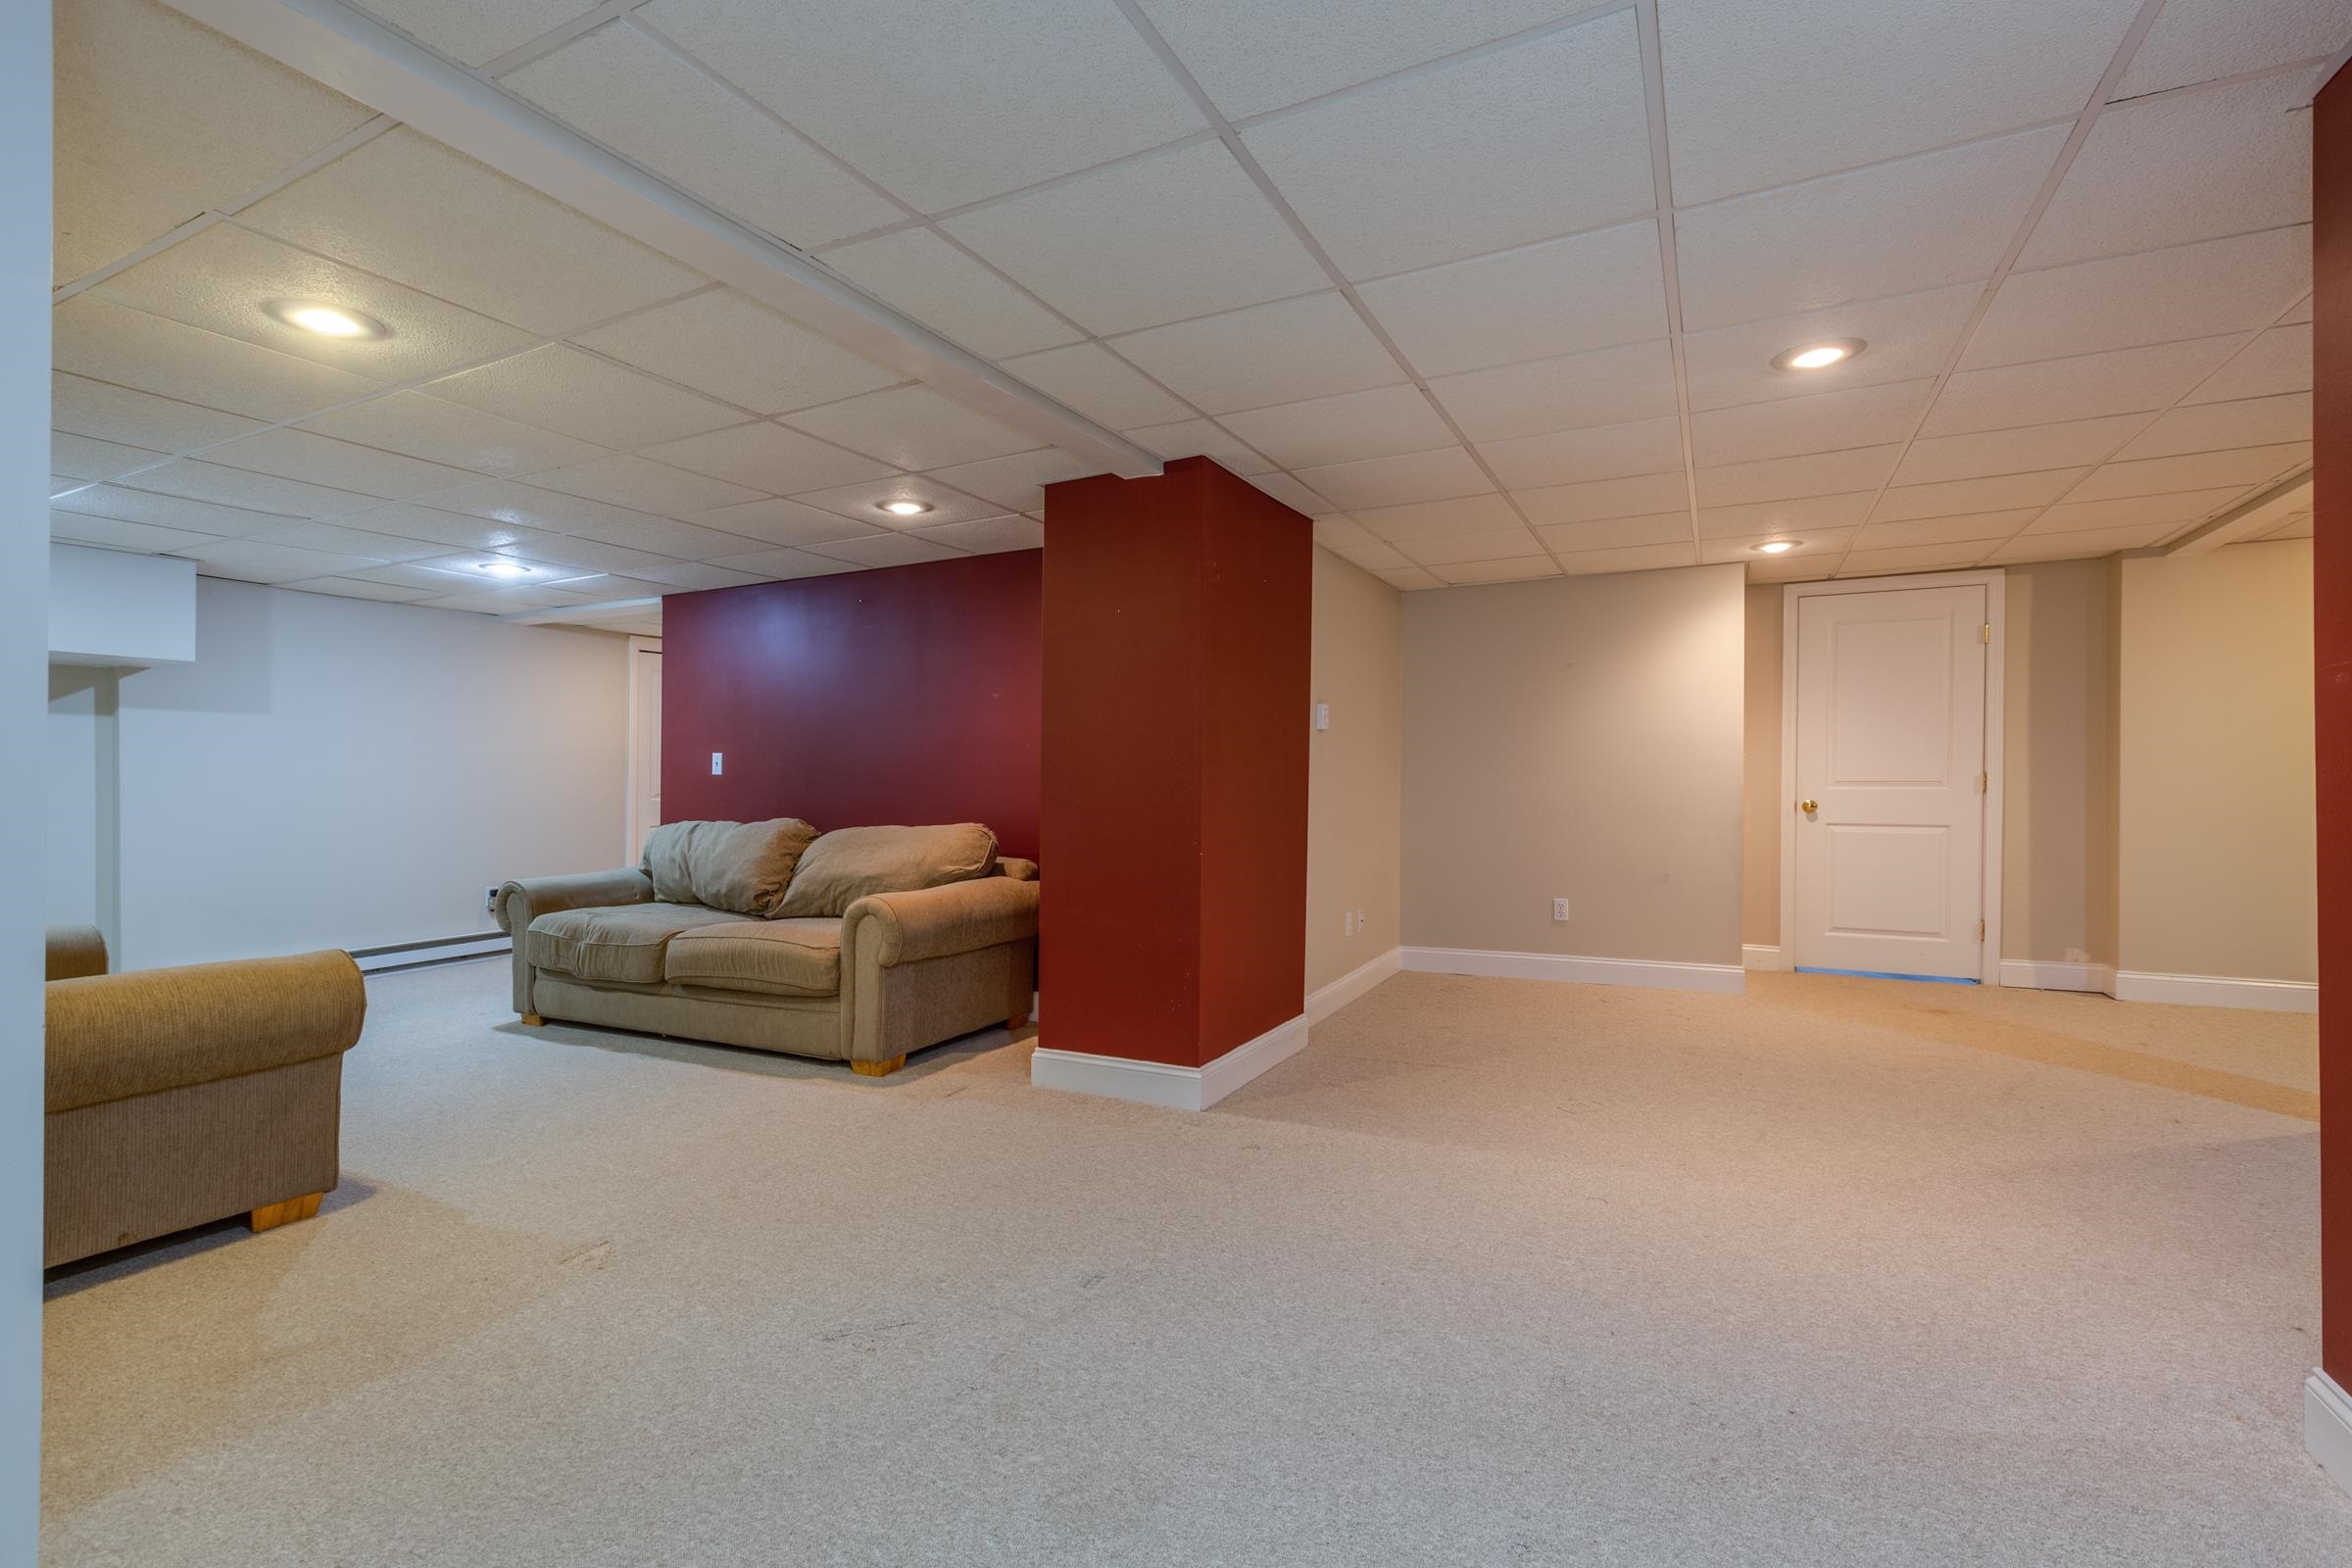 Partially Finished Basement, 2 other rooms off the main area